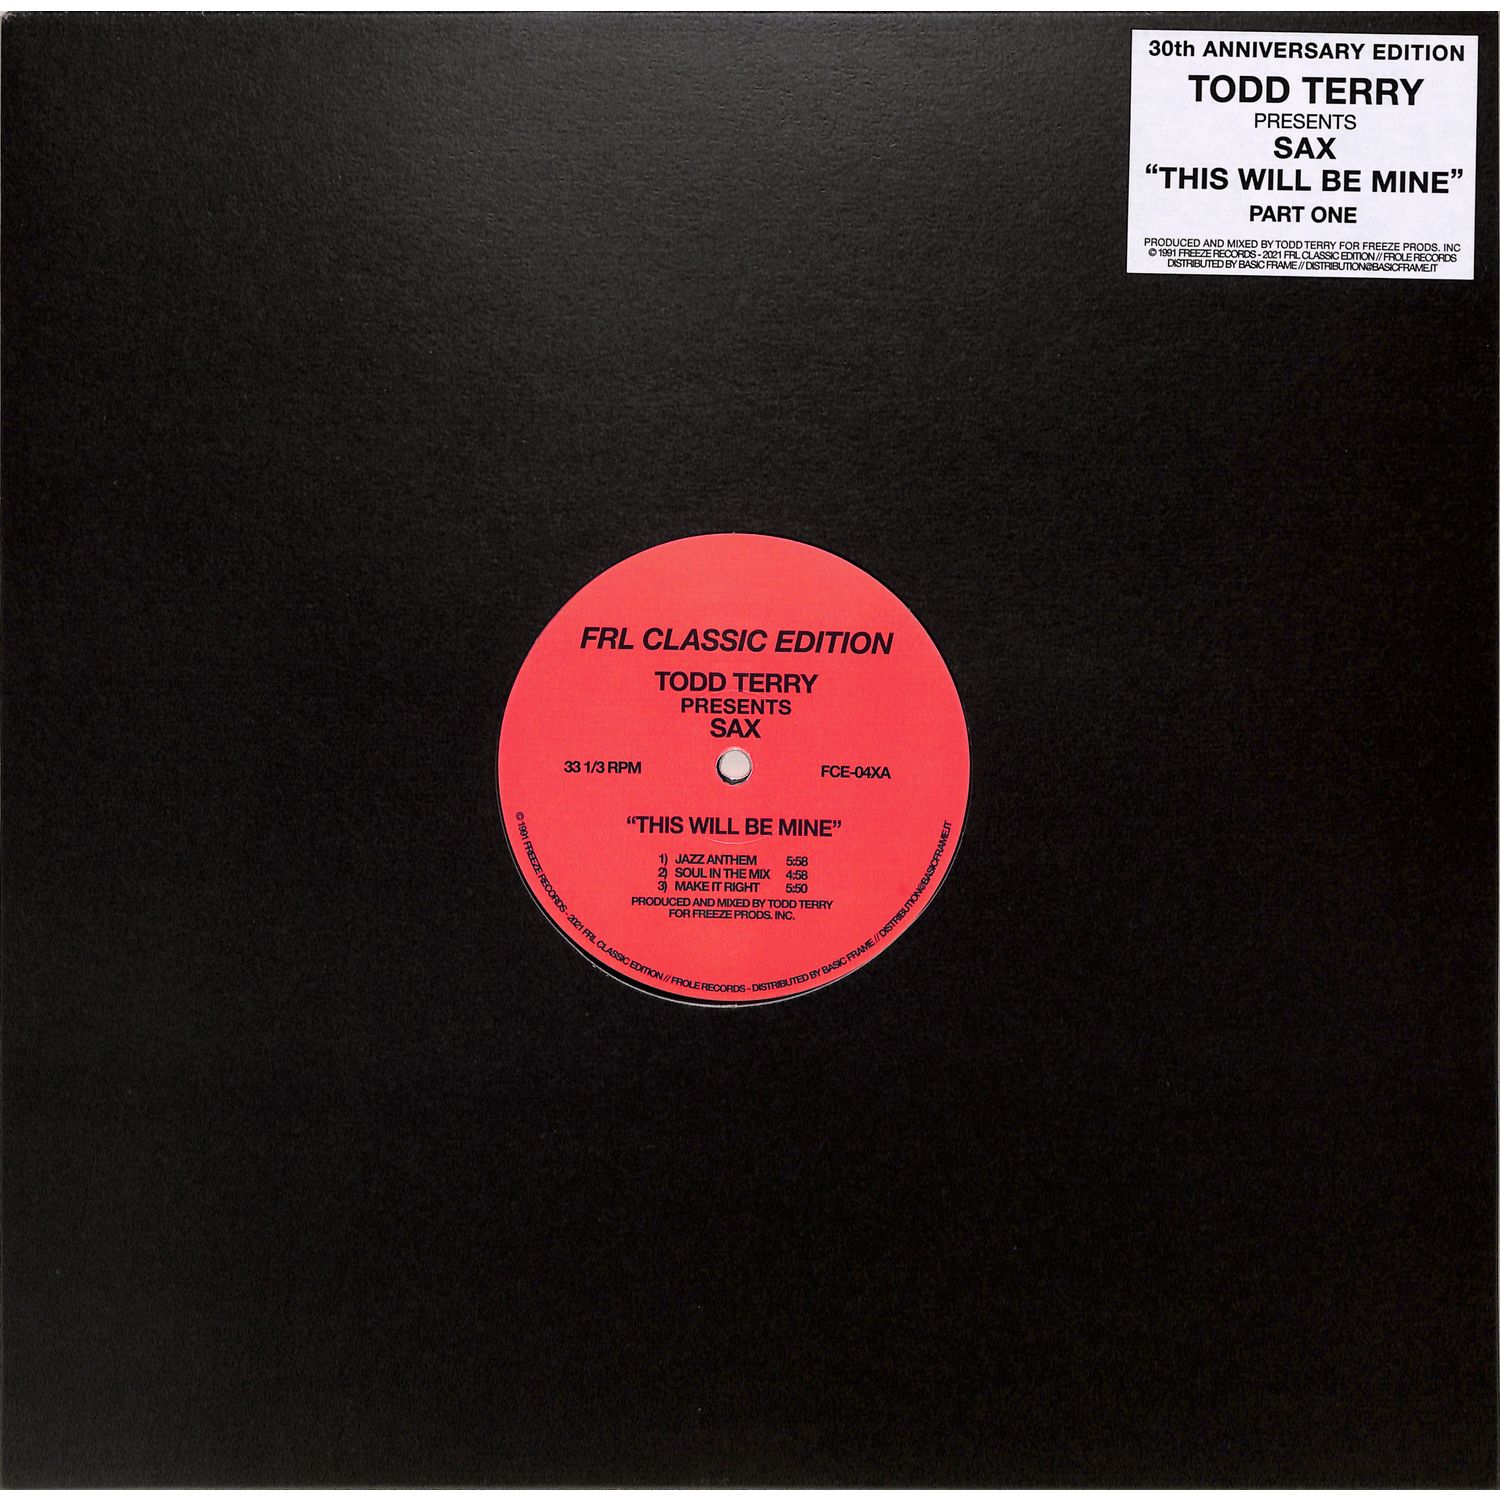 Todd Terry Presents Sax - THIS WILL BE MINE PT. 1 